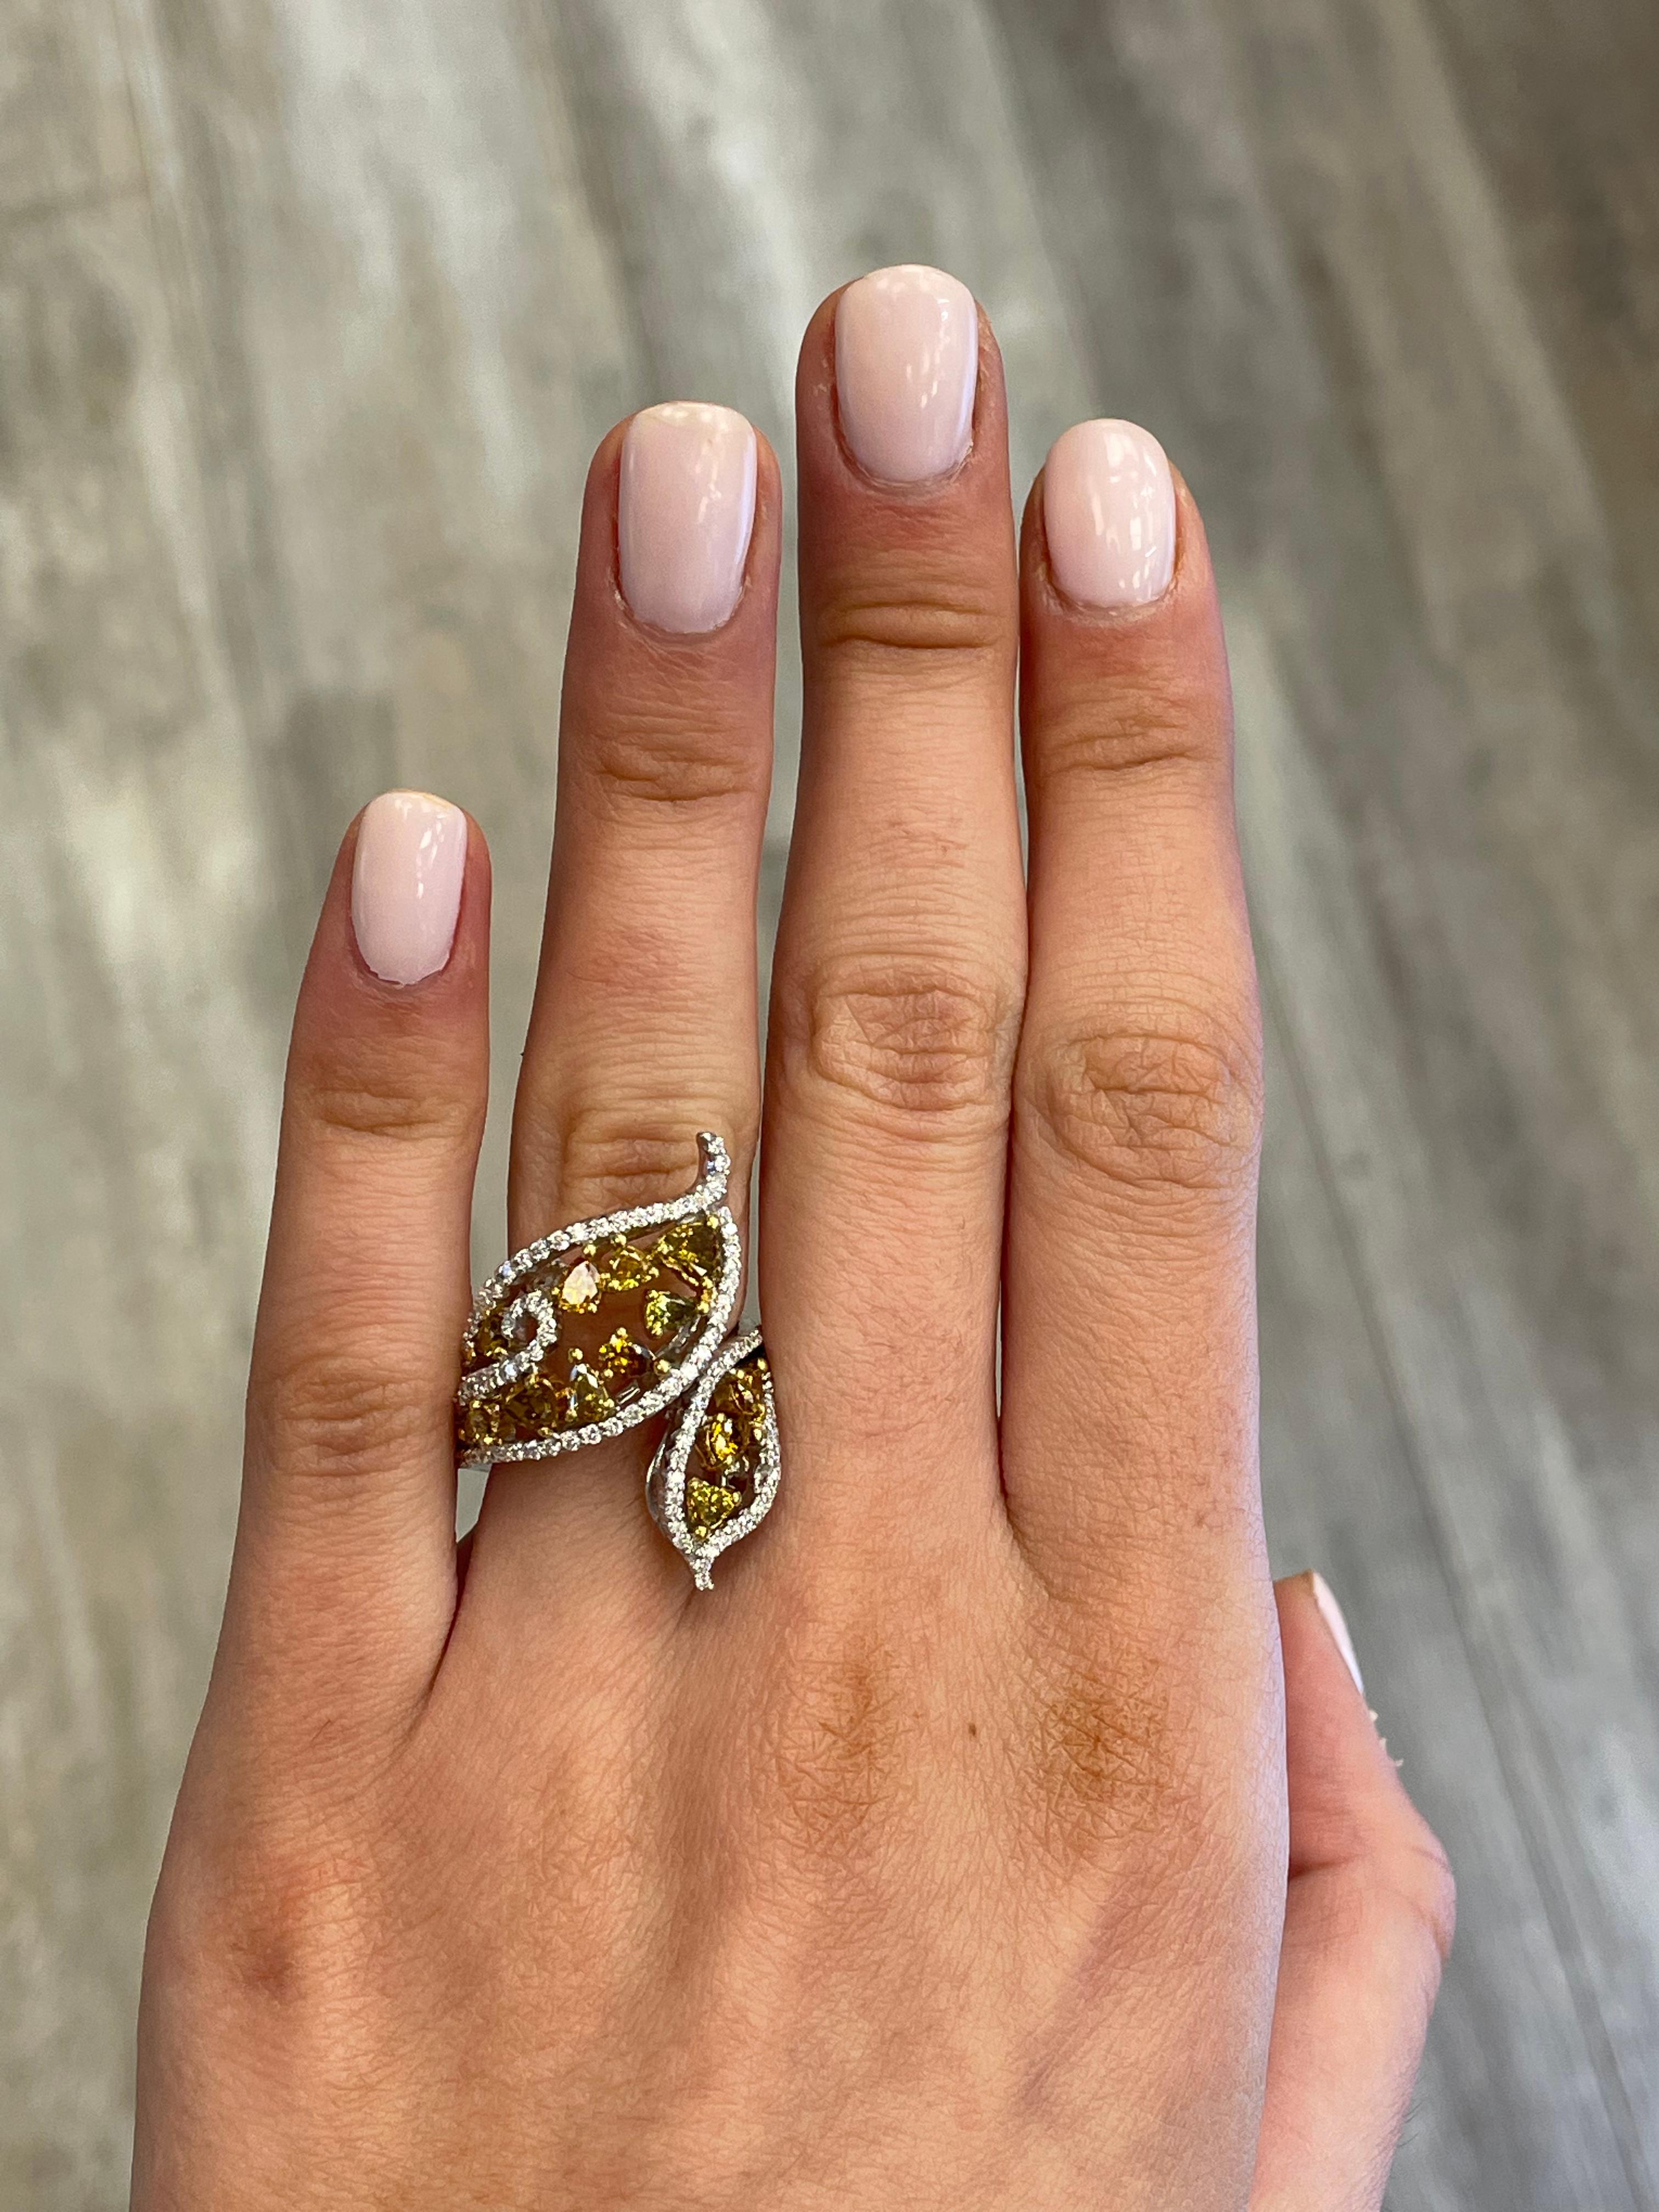 Modern yellow & brown color diamond floral / leaf bypass  ring, by Alexander Beverly Hills. 
2.16 carats total diamond weight.
1.50 carats of a mix of approximately Fancy Yellowish Brow to Fancy Brownish Yellow color diamonds. Complimented by 108